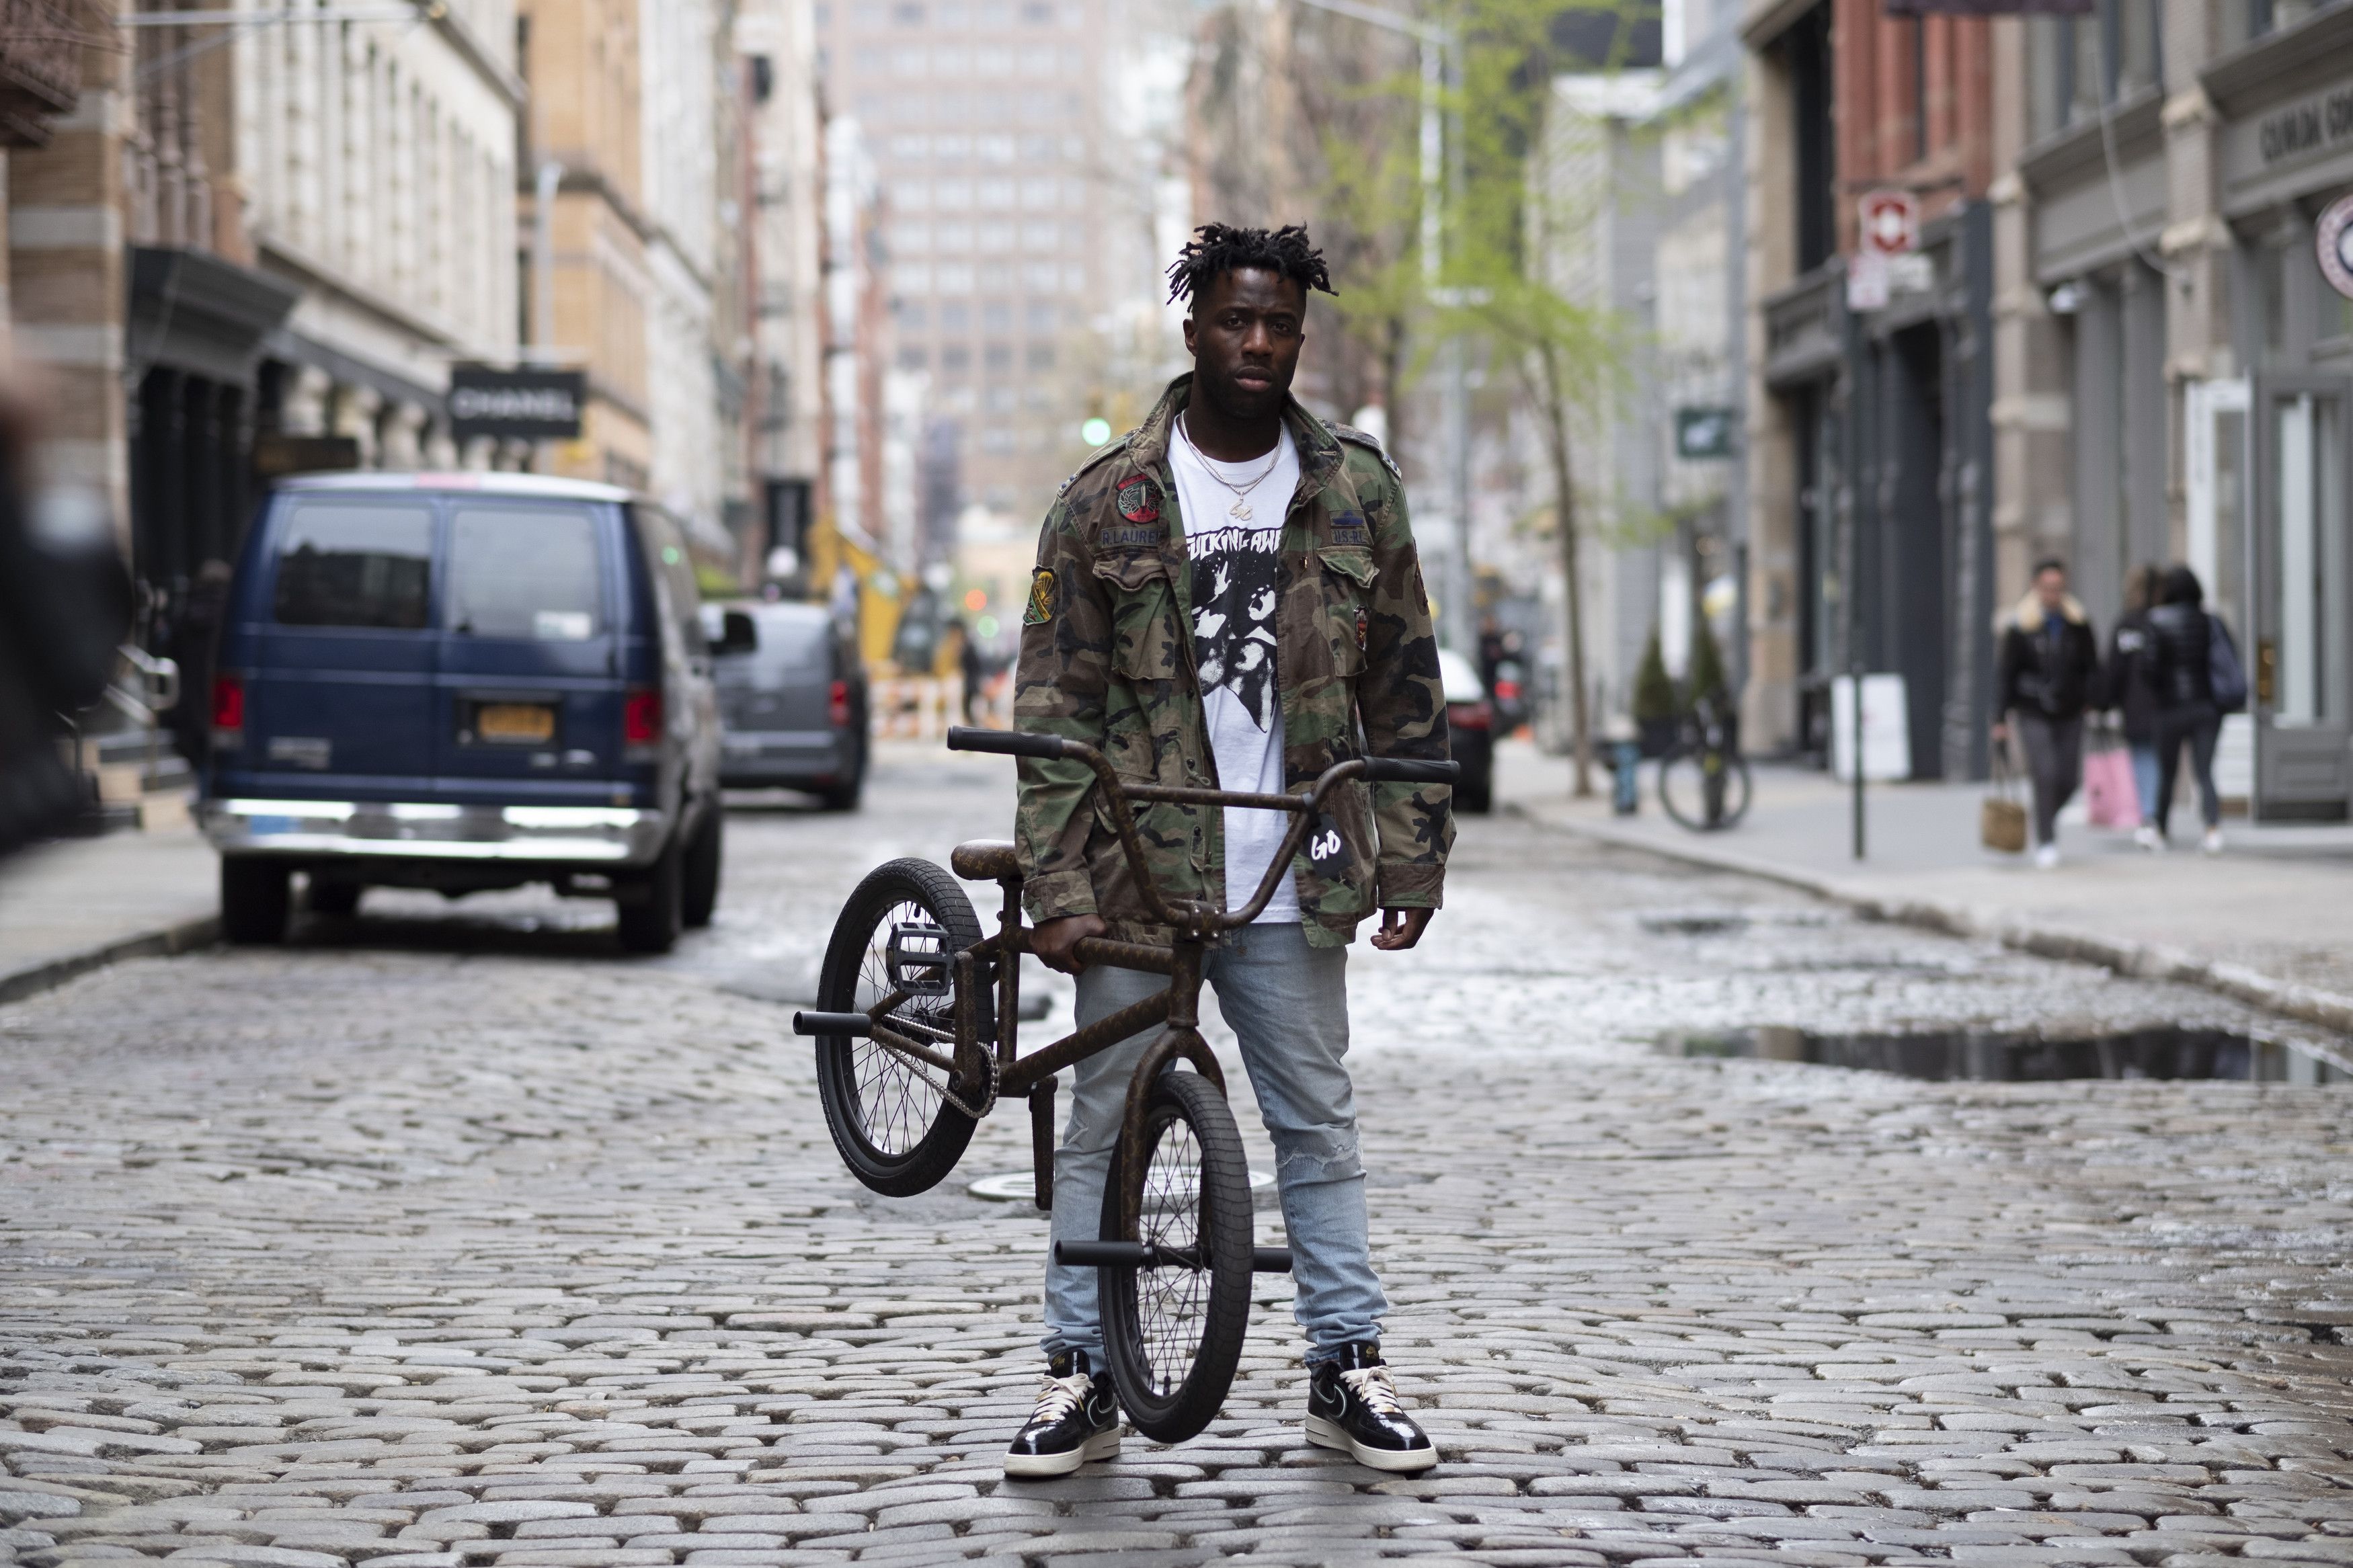 Nigel Sylvester Pays Homage to Louis Vuitton With 218 CAPUCINE (6 Photos)